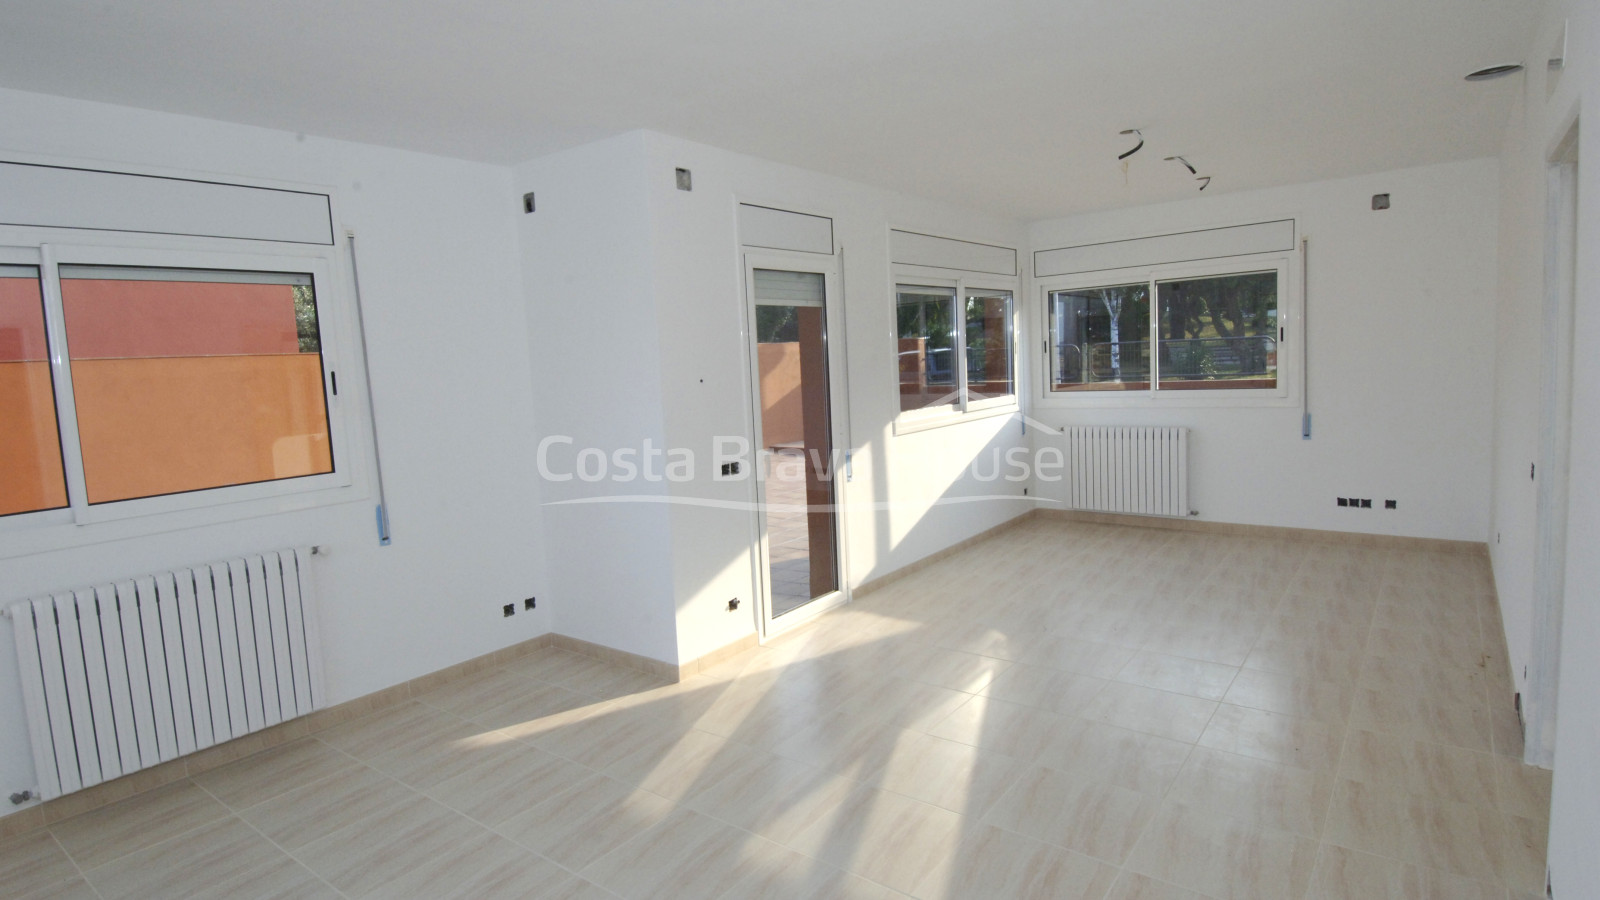 Almost brand new house with garden for sale in the outskirts of Palafrugell. Possibility of  pool.